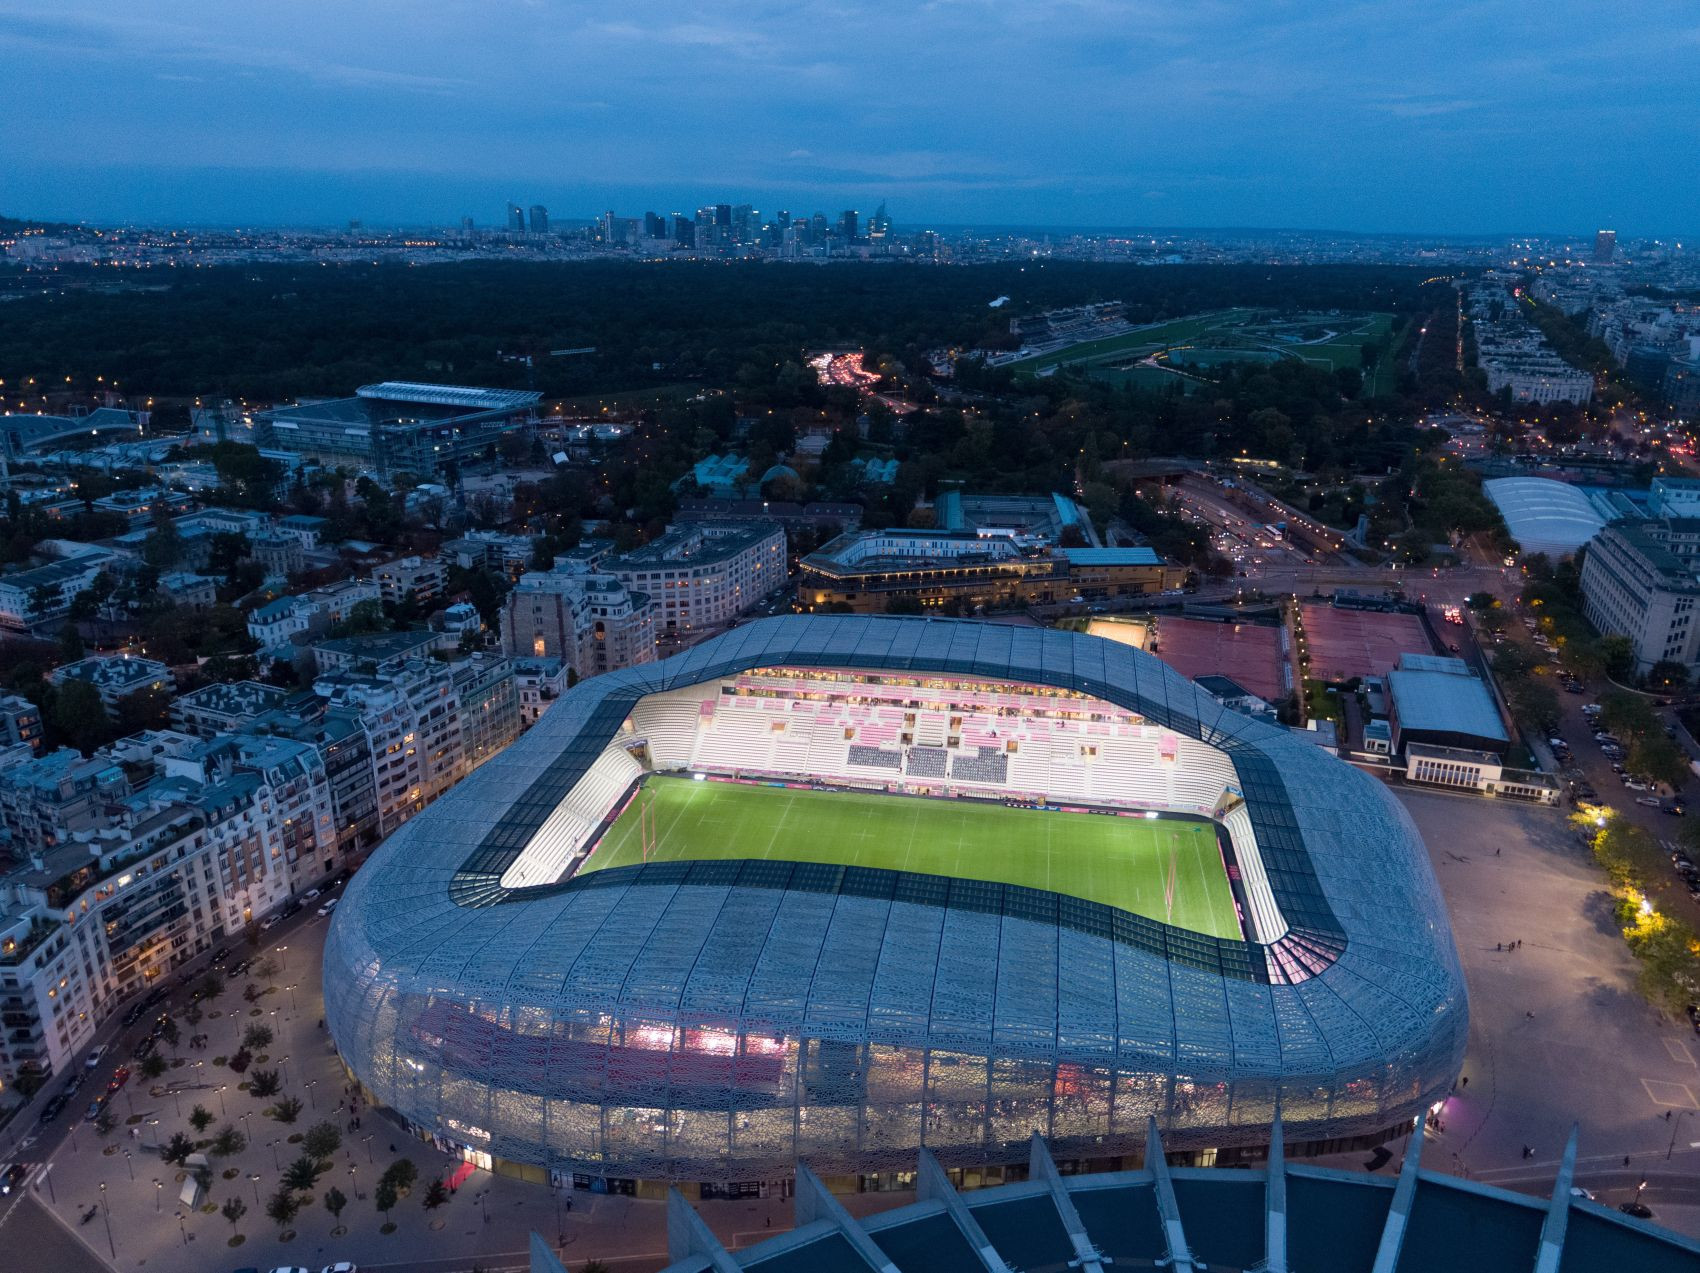 Stade Jean Bouin is set to be the site of Deutches Haus for Paris 2024 ©Stade.Fr